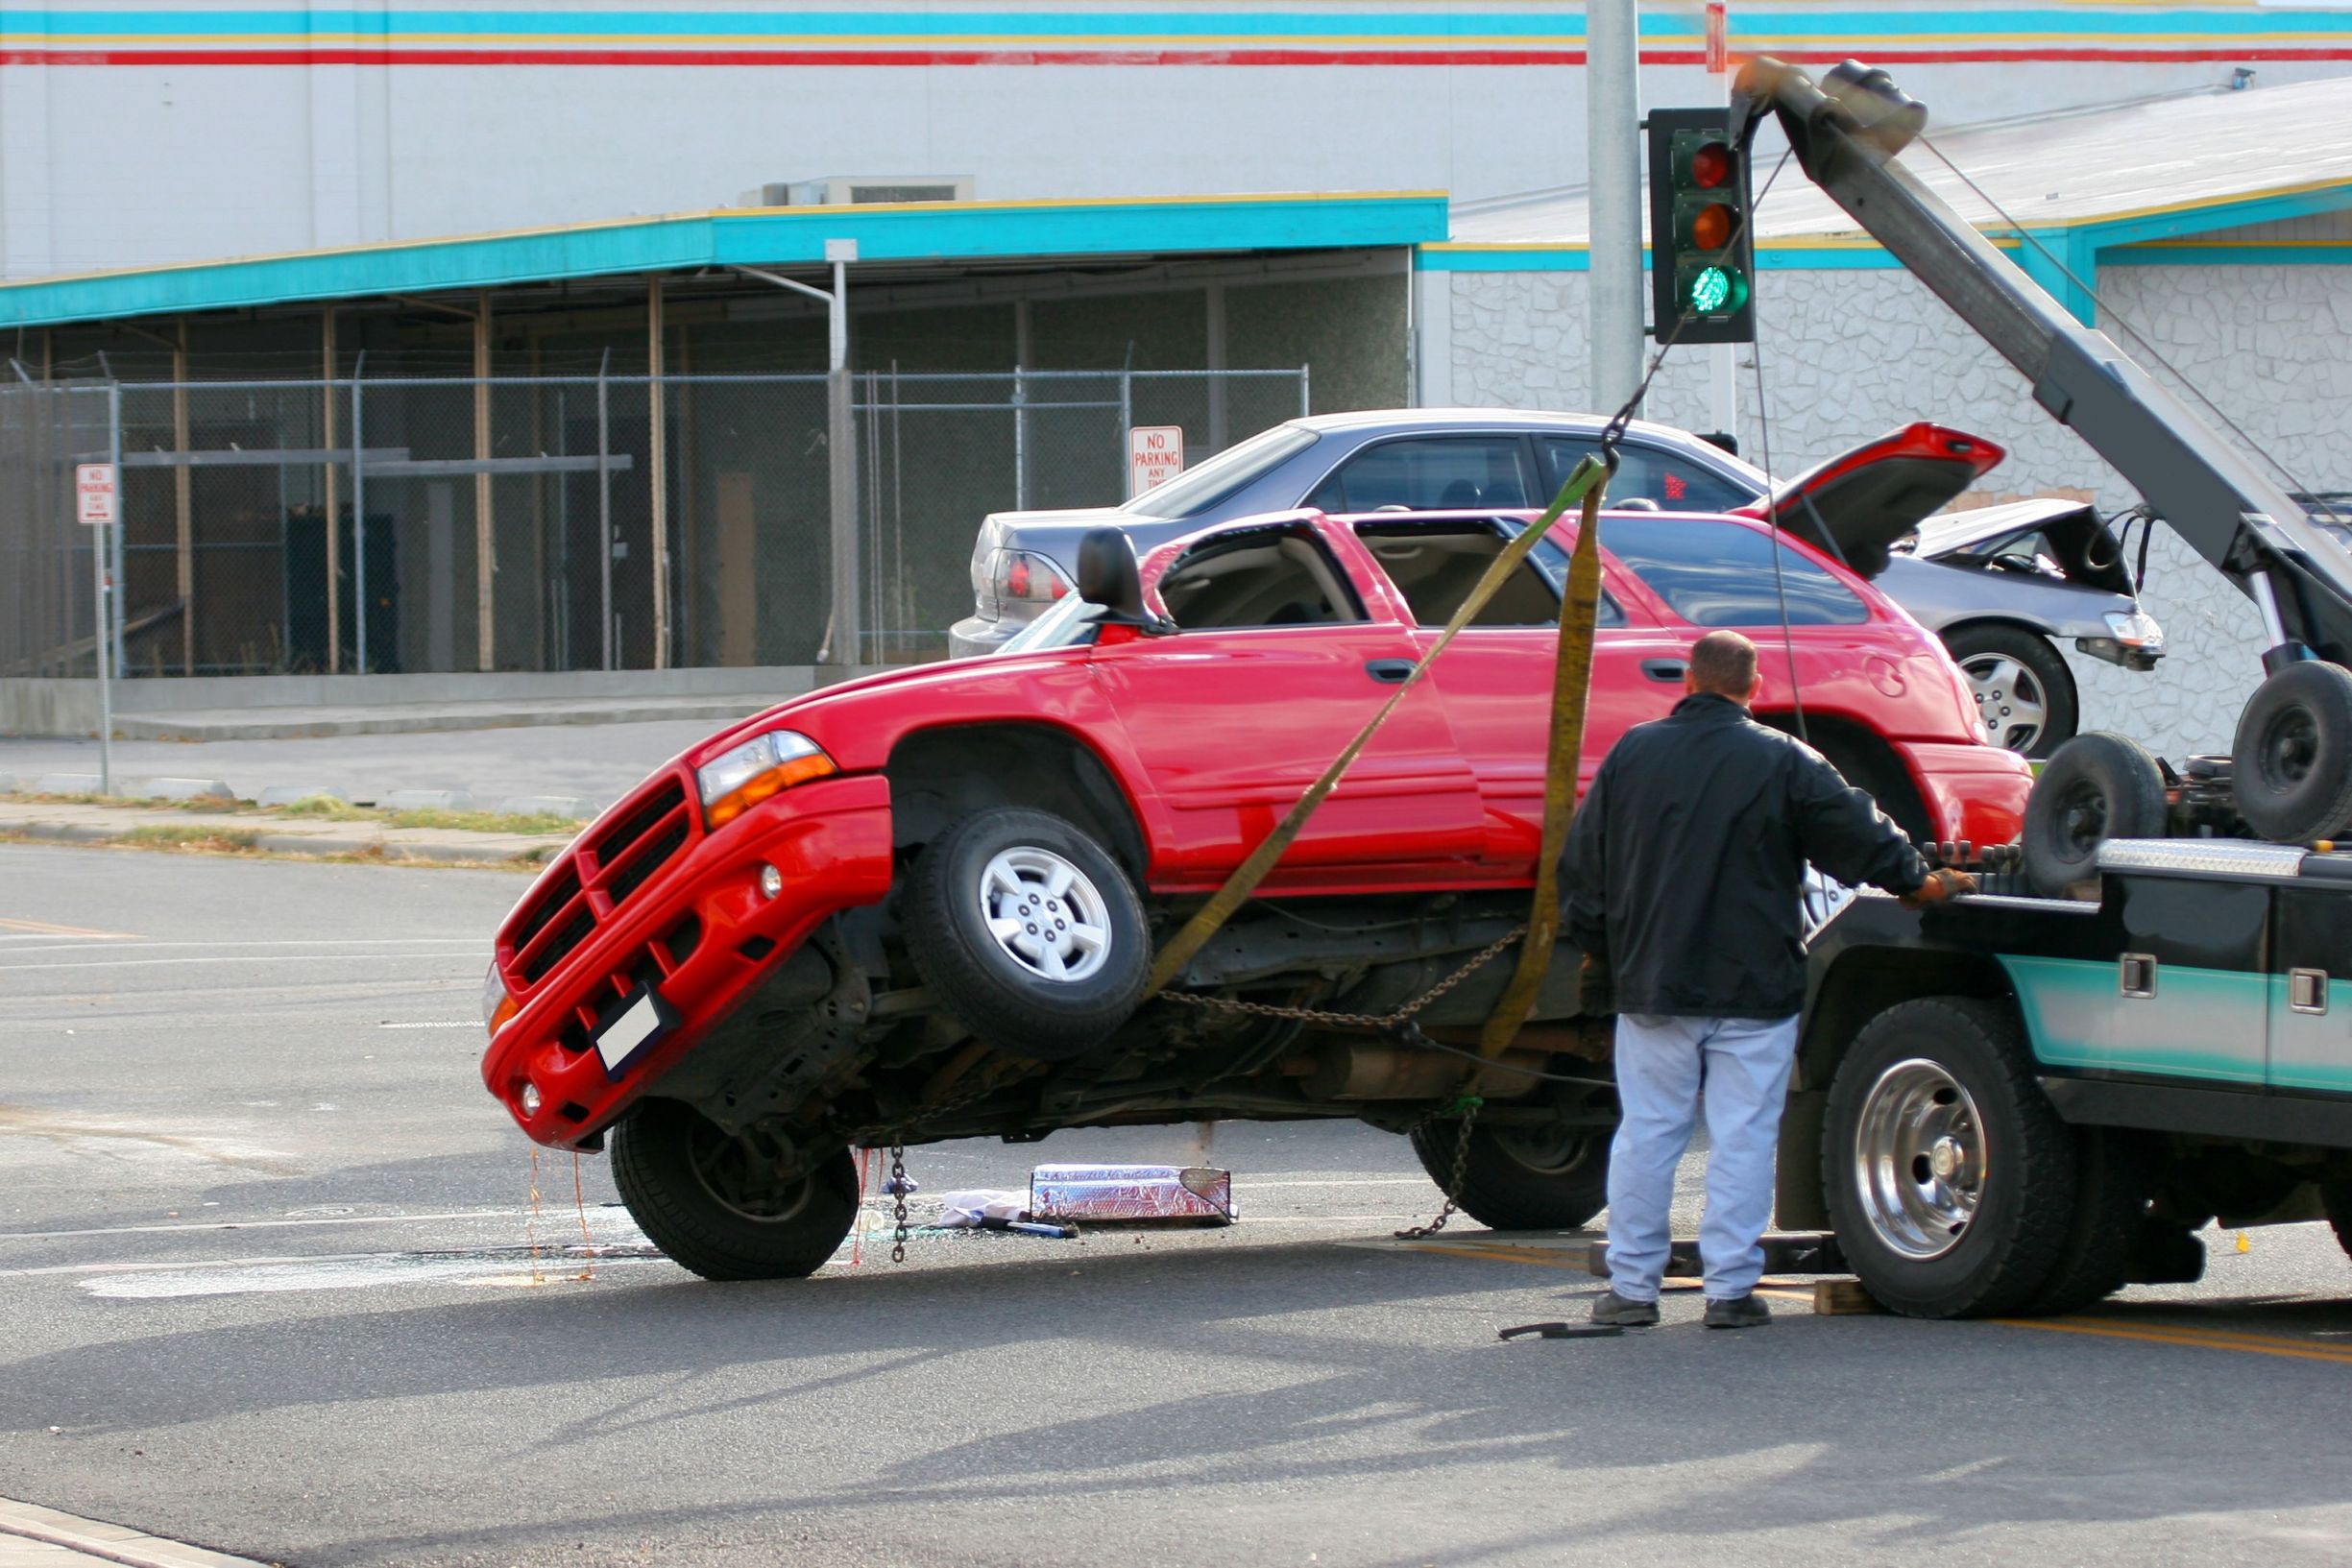 When to Call for a Tow Truck in Hattiesburg